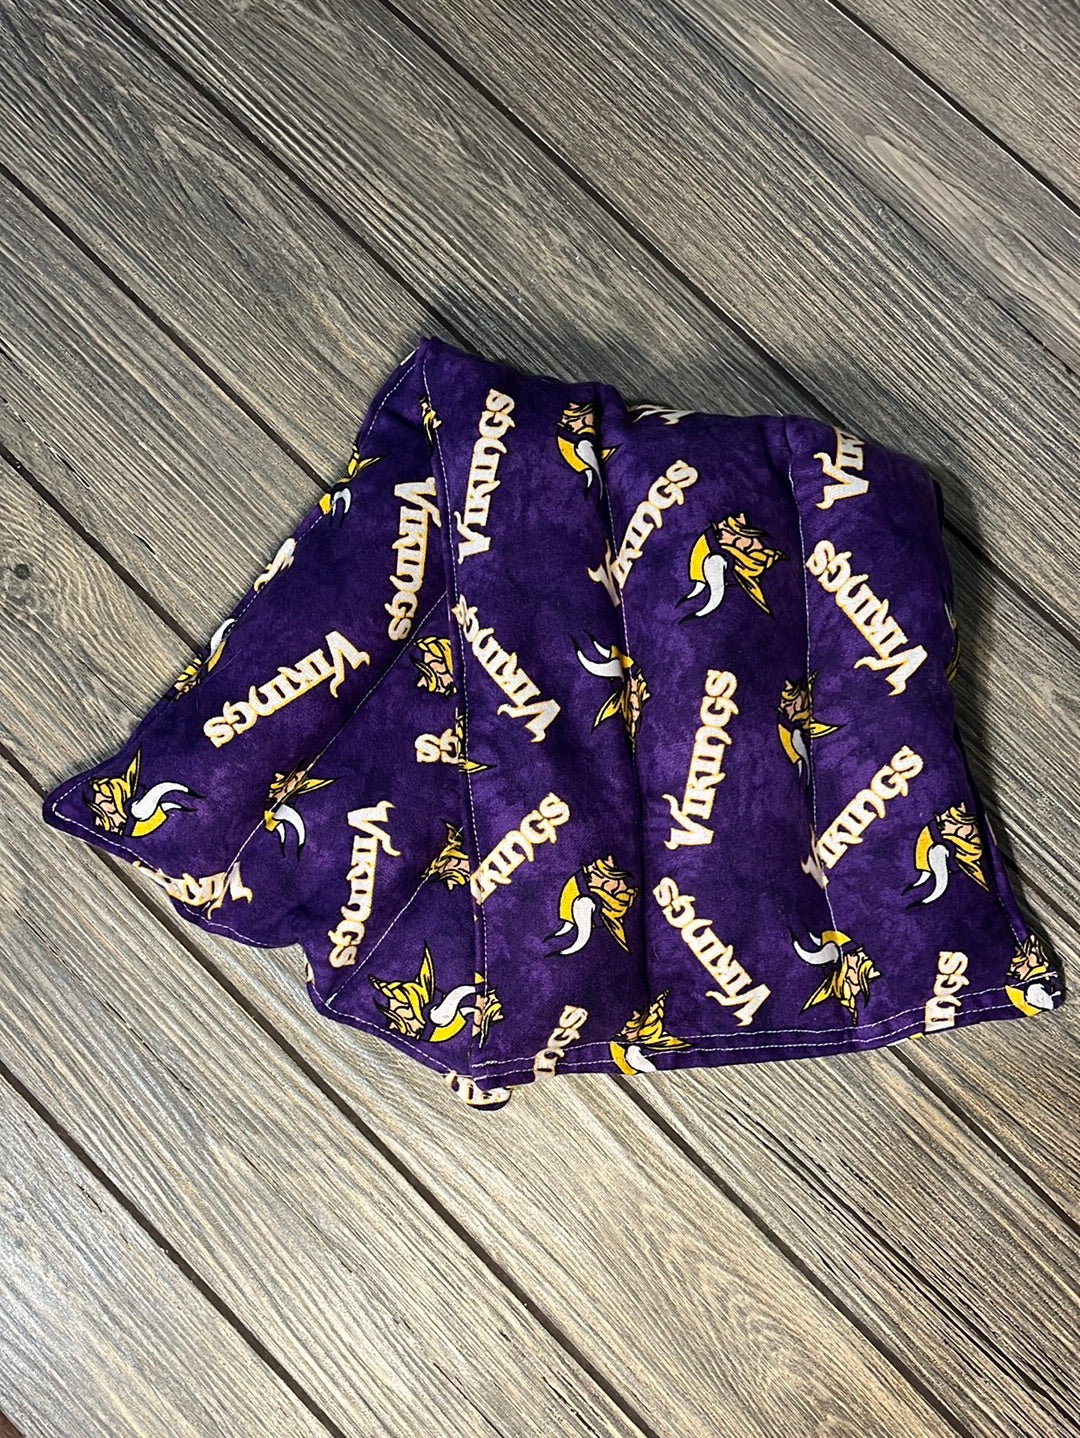 Heat Therapy Rice Bag, KC Back Therapy, Vikings